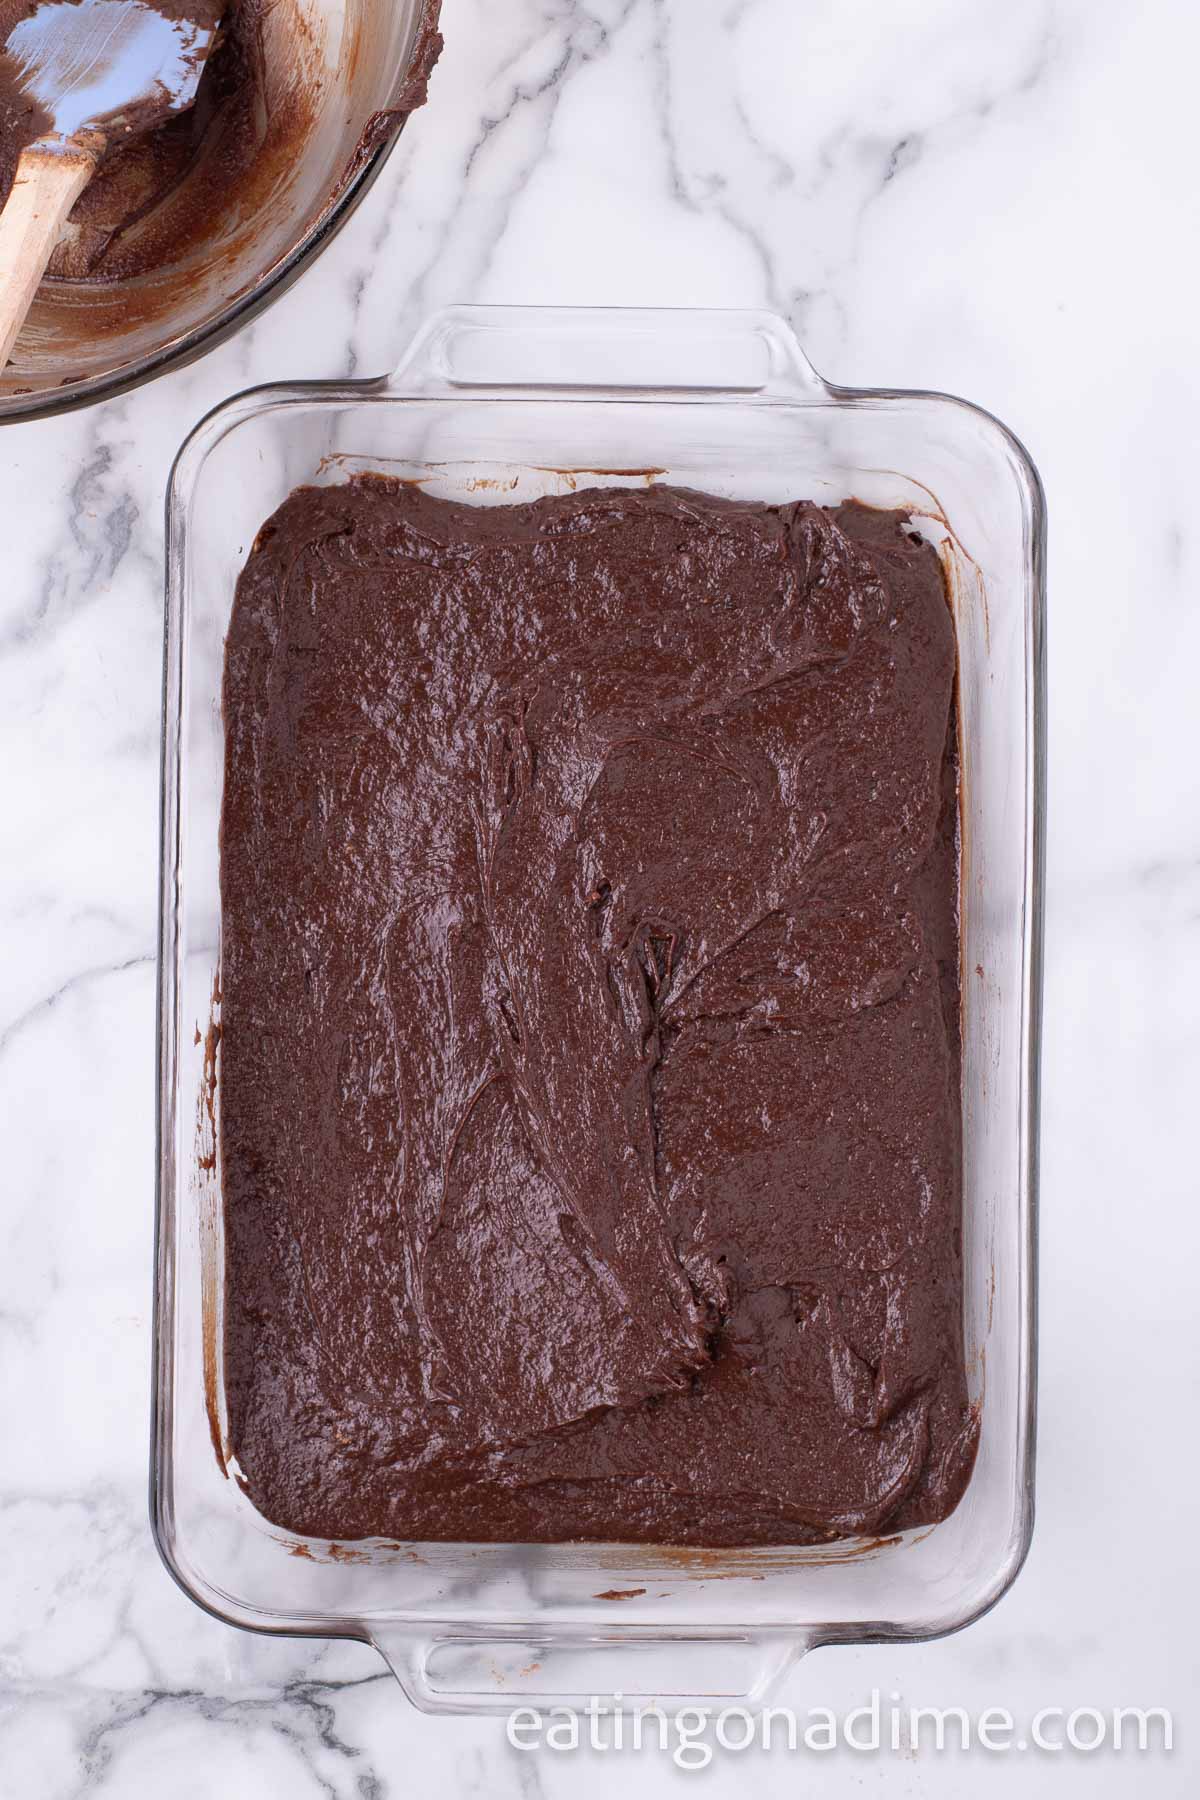 Brownie batter spread into a glass baking dish